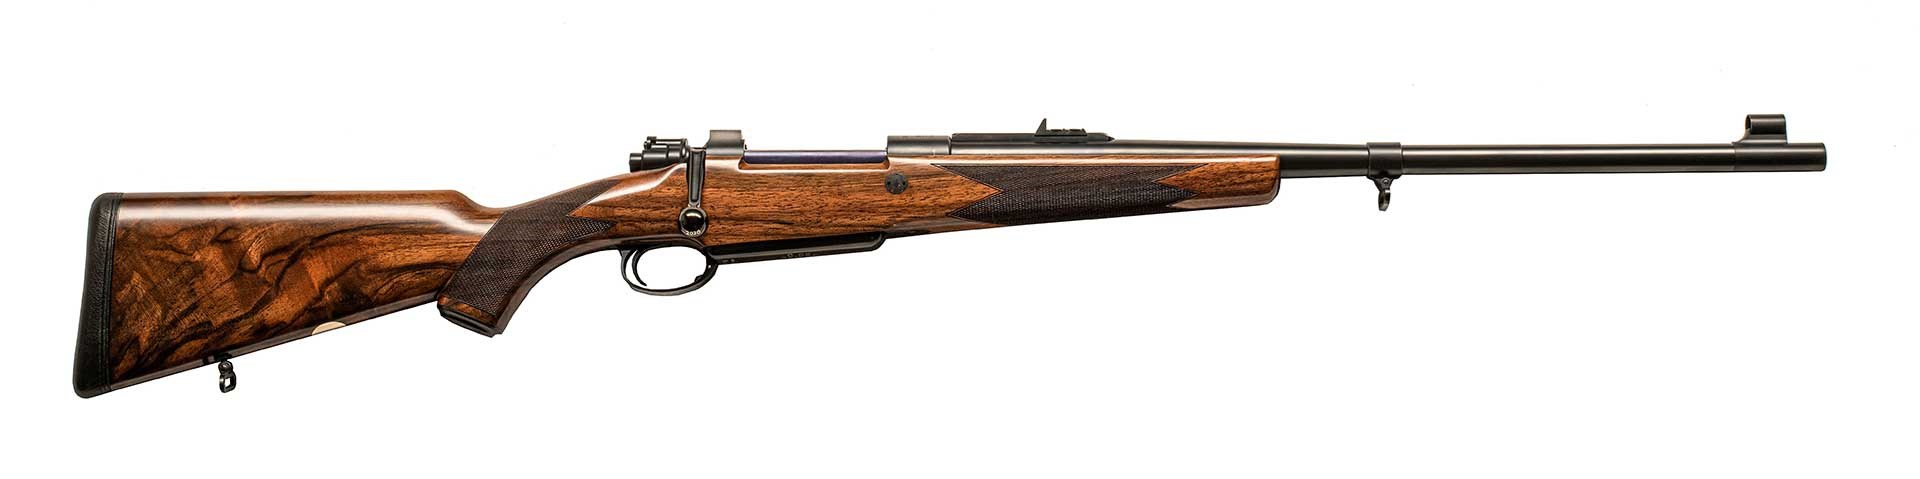 Full-length .416 Rigby magazine rifle shown on white, right side.